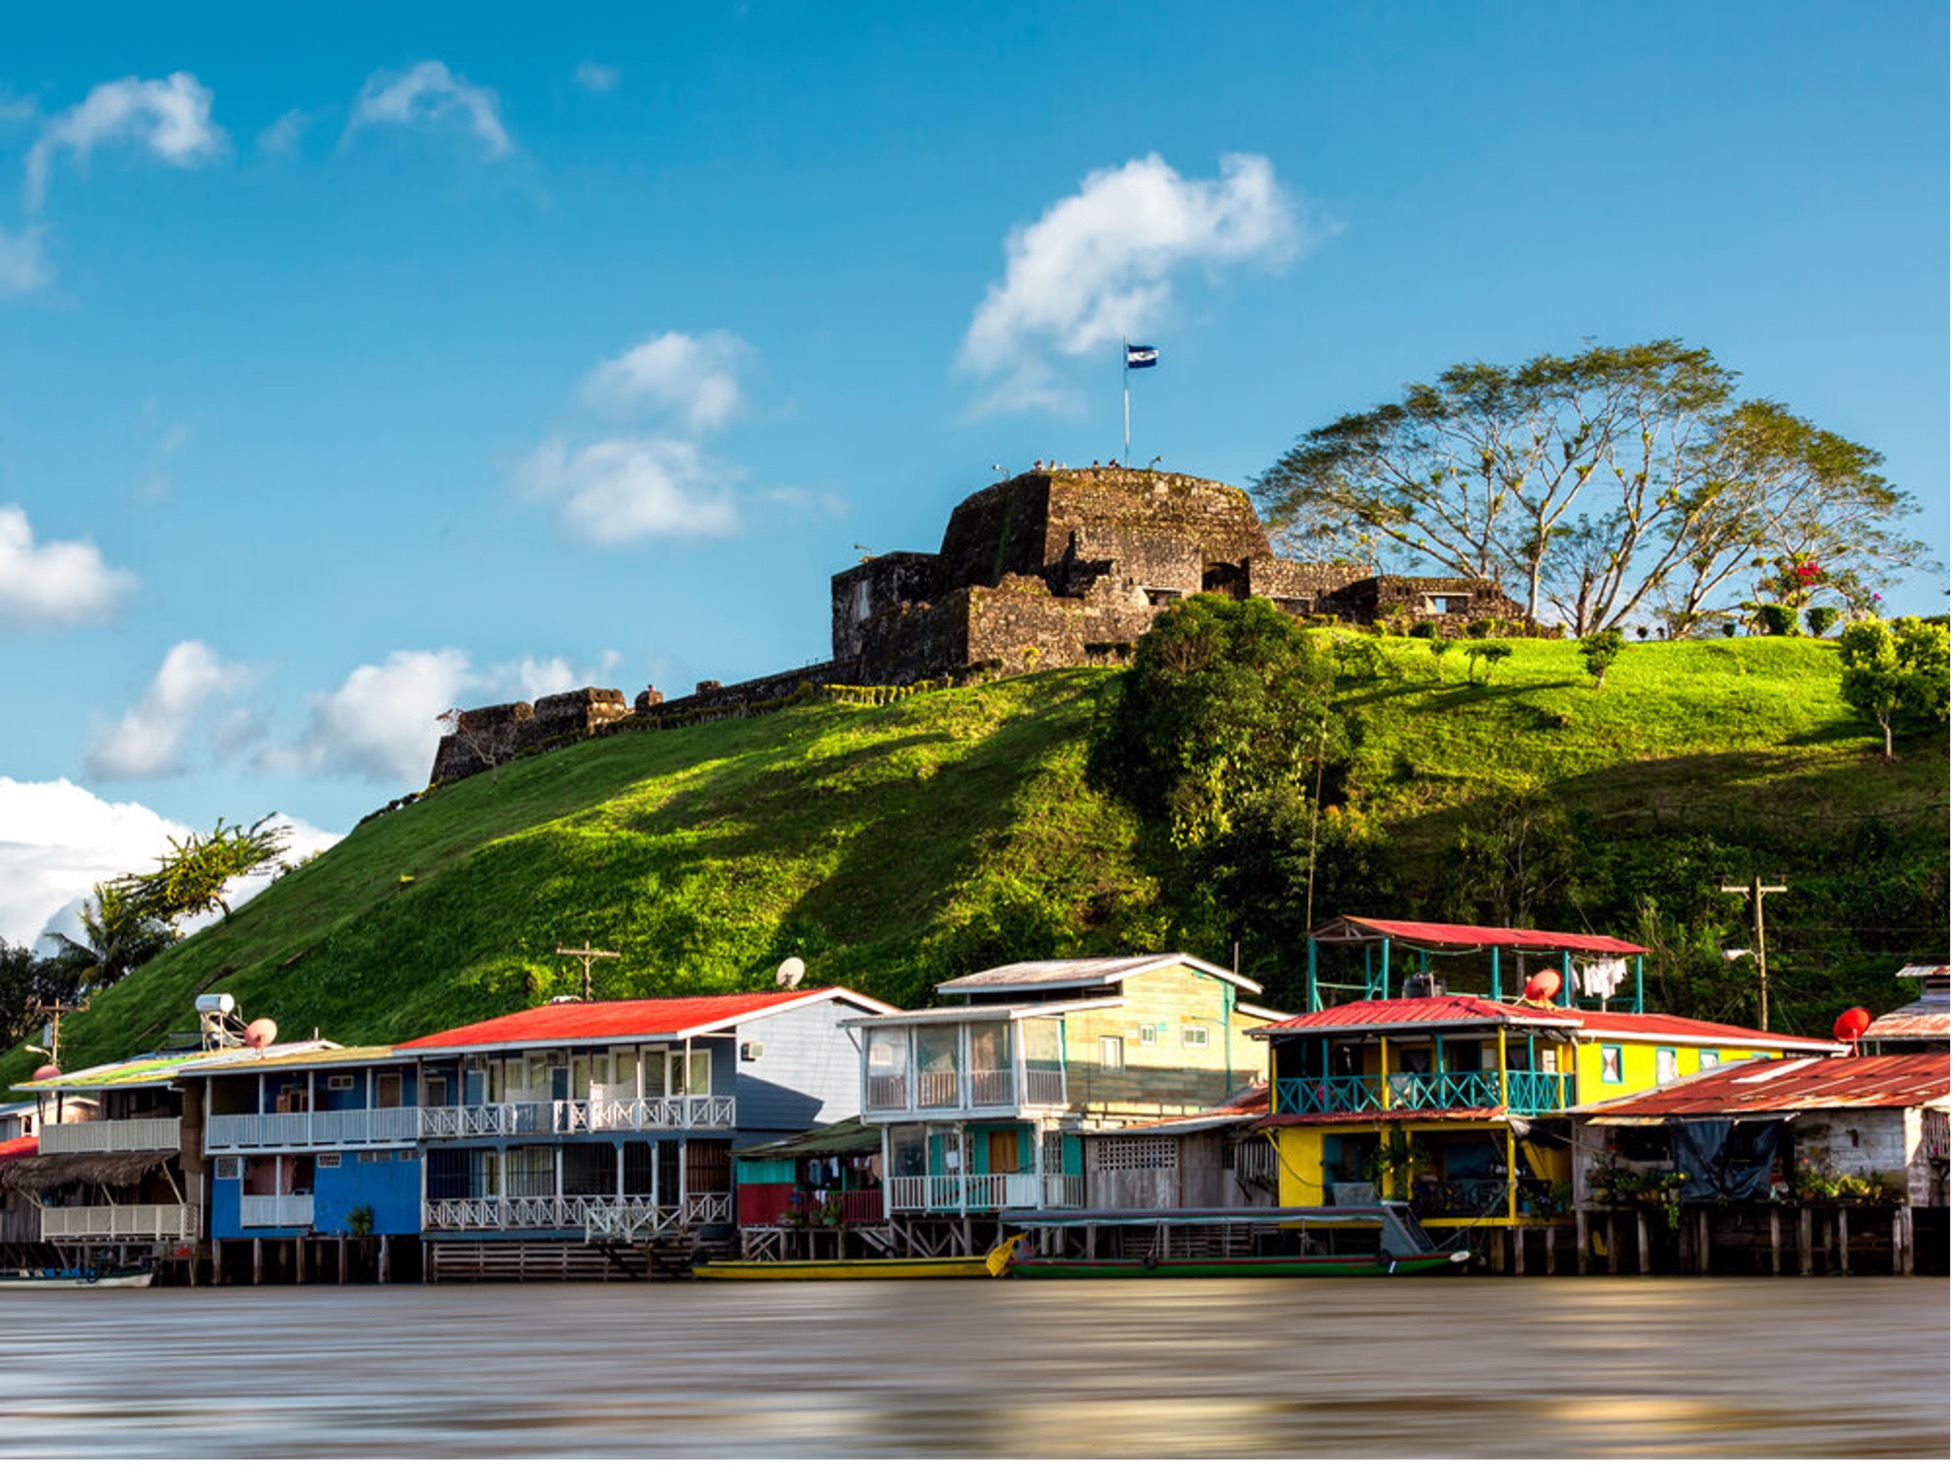 The Castillo de la Inmaculada Concepción, a fortress built in the seventeenth century by the Spanish Crown to defend Lake Nicaragua from increasingly hostile pirate and maritime activity. Photo credit: Central American Bank for Economic Integration (CABEI).